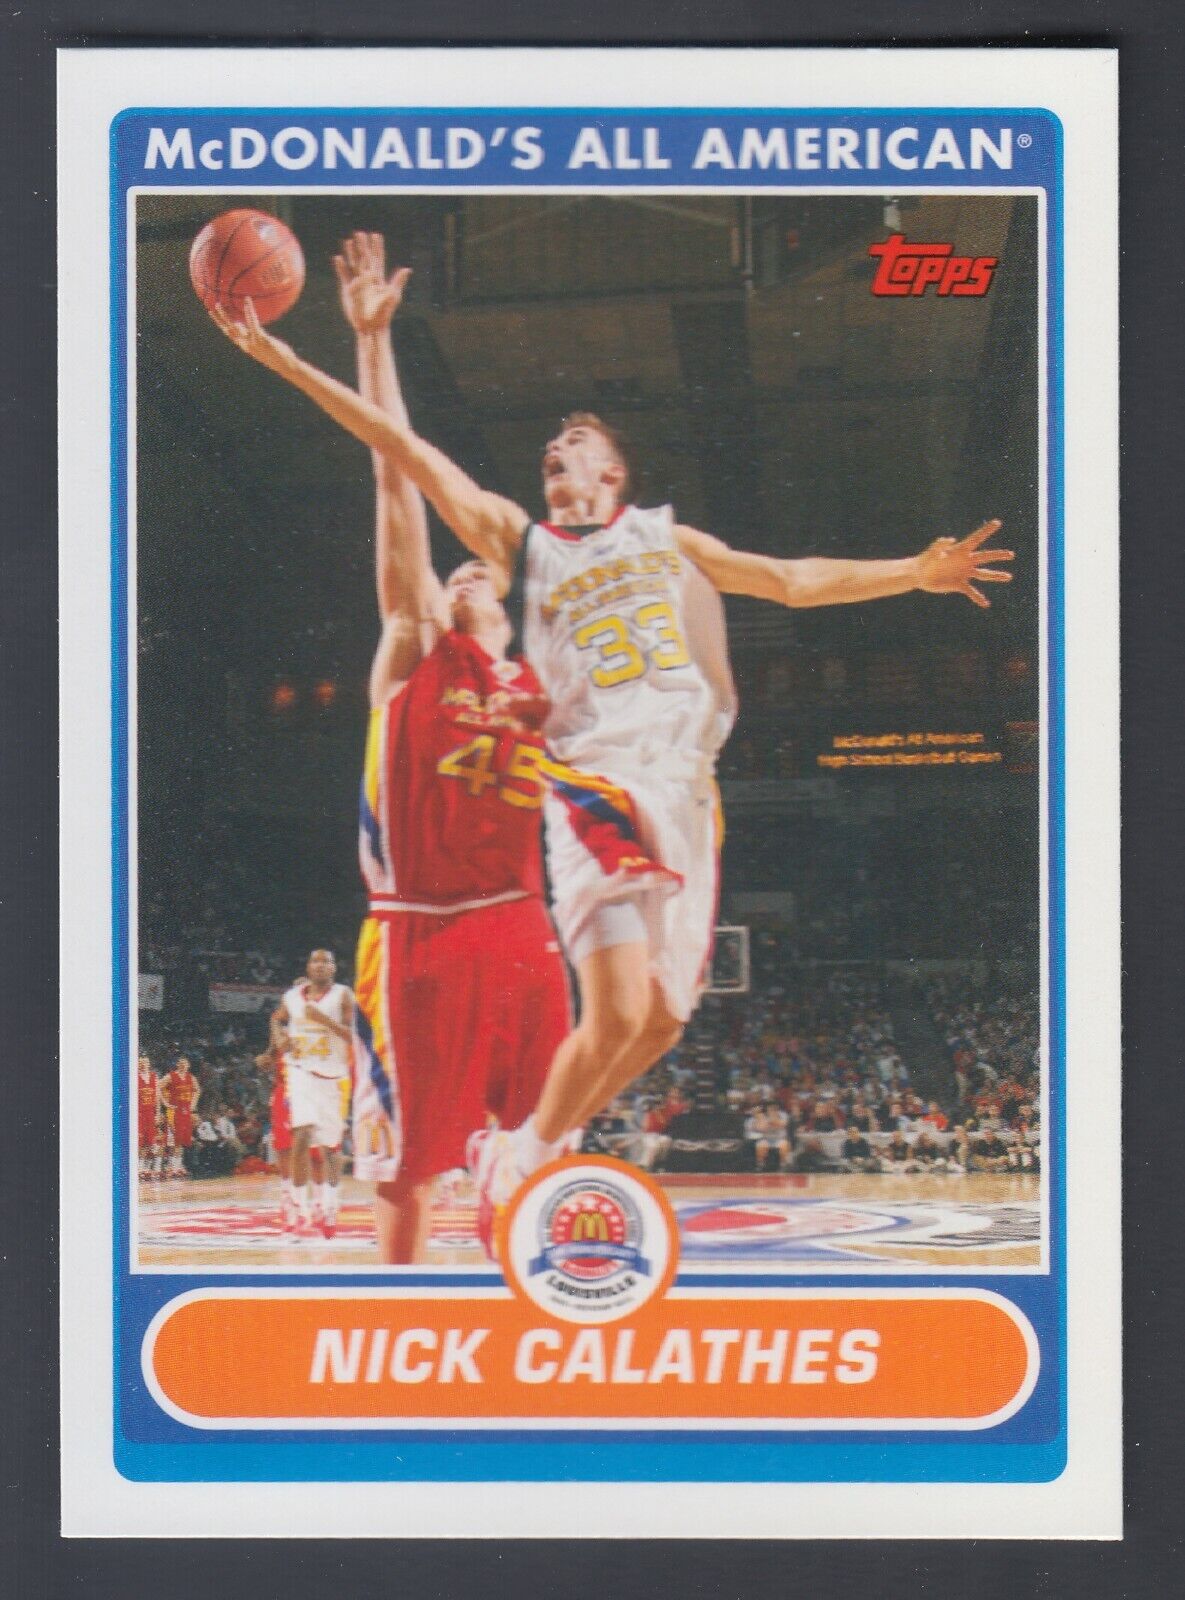 2007 TOPPS MCDONALDS NICK CALATHES TRUE ROOKIE MINT RARE 1ST CARD EVER MADE HTF. rookie card picture